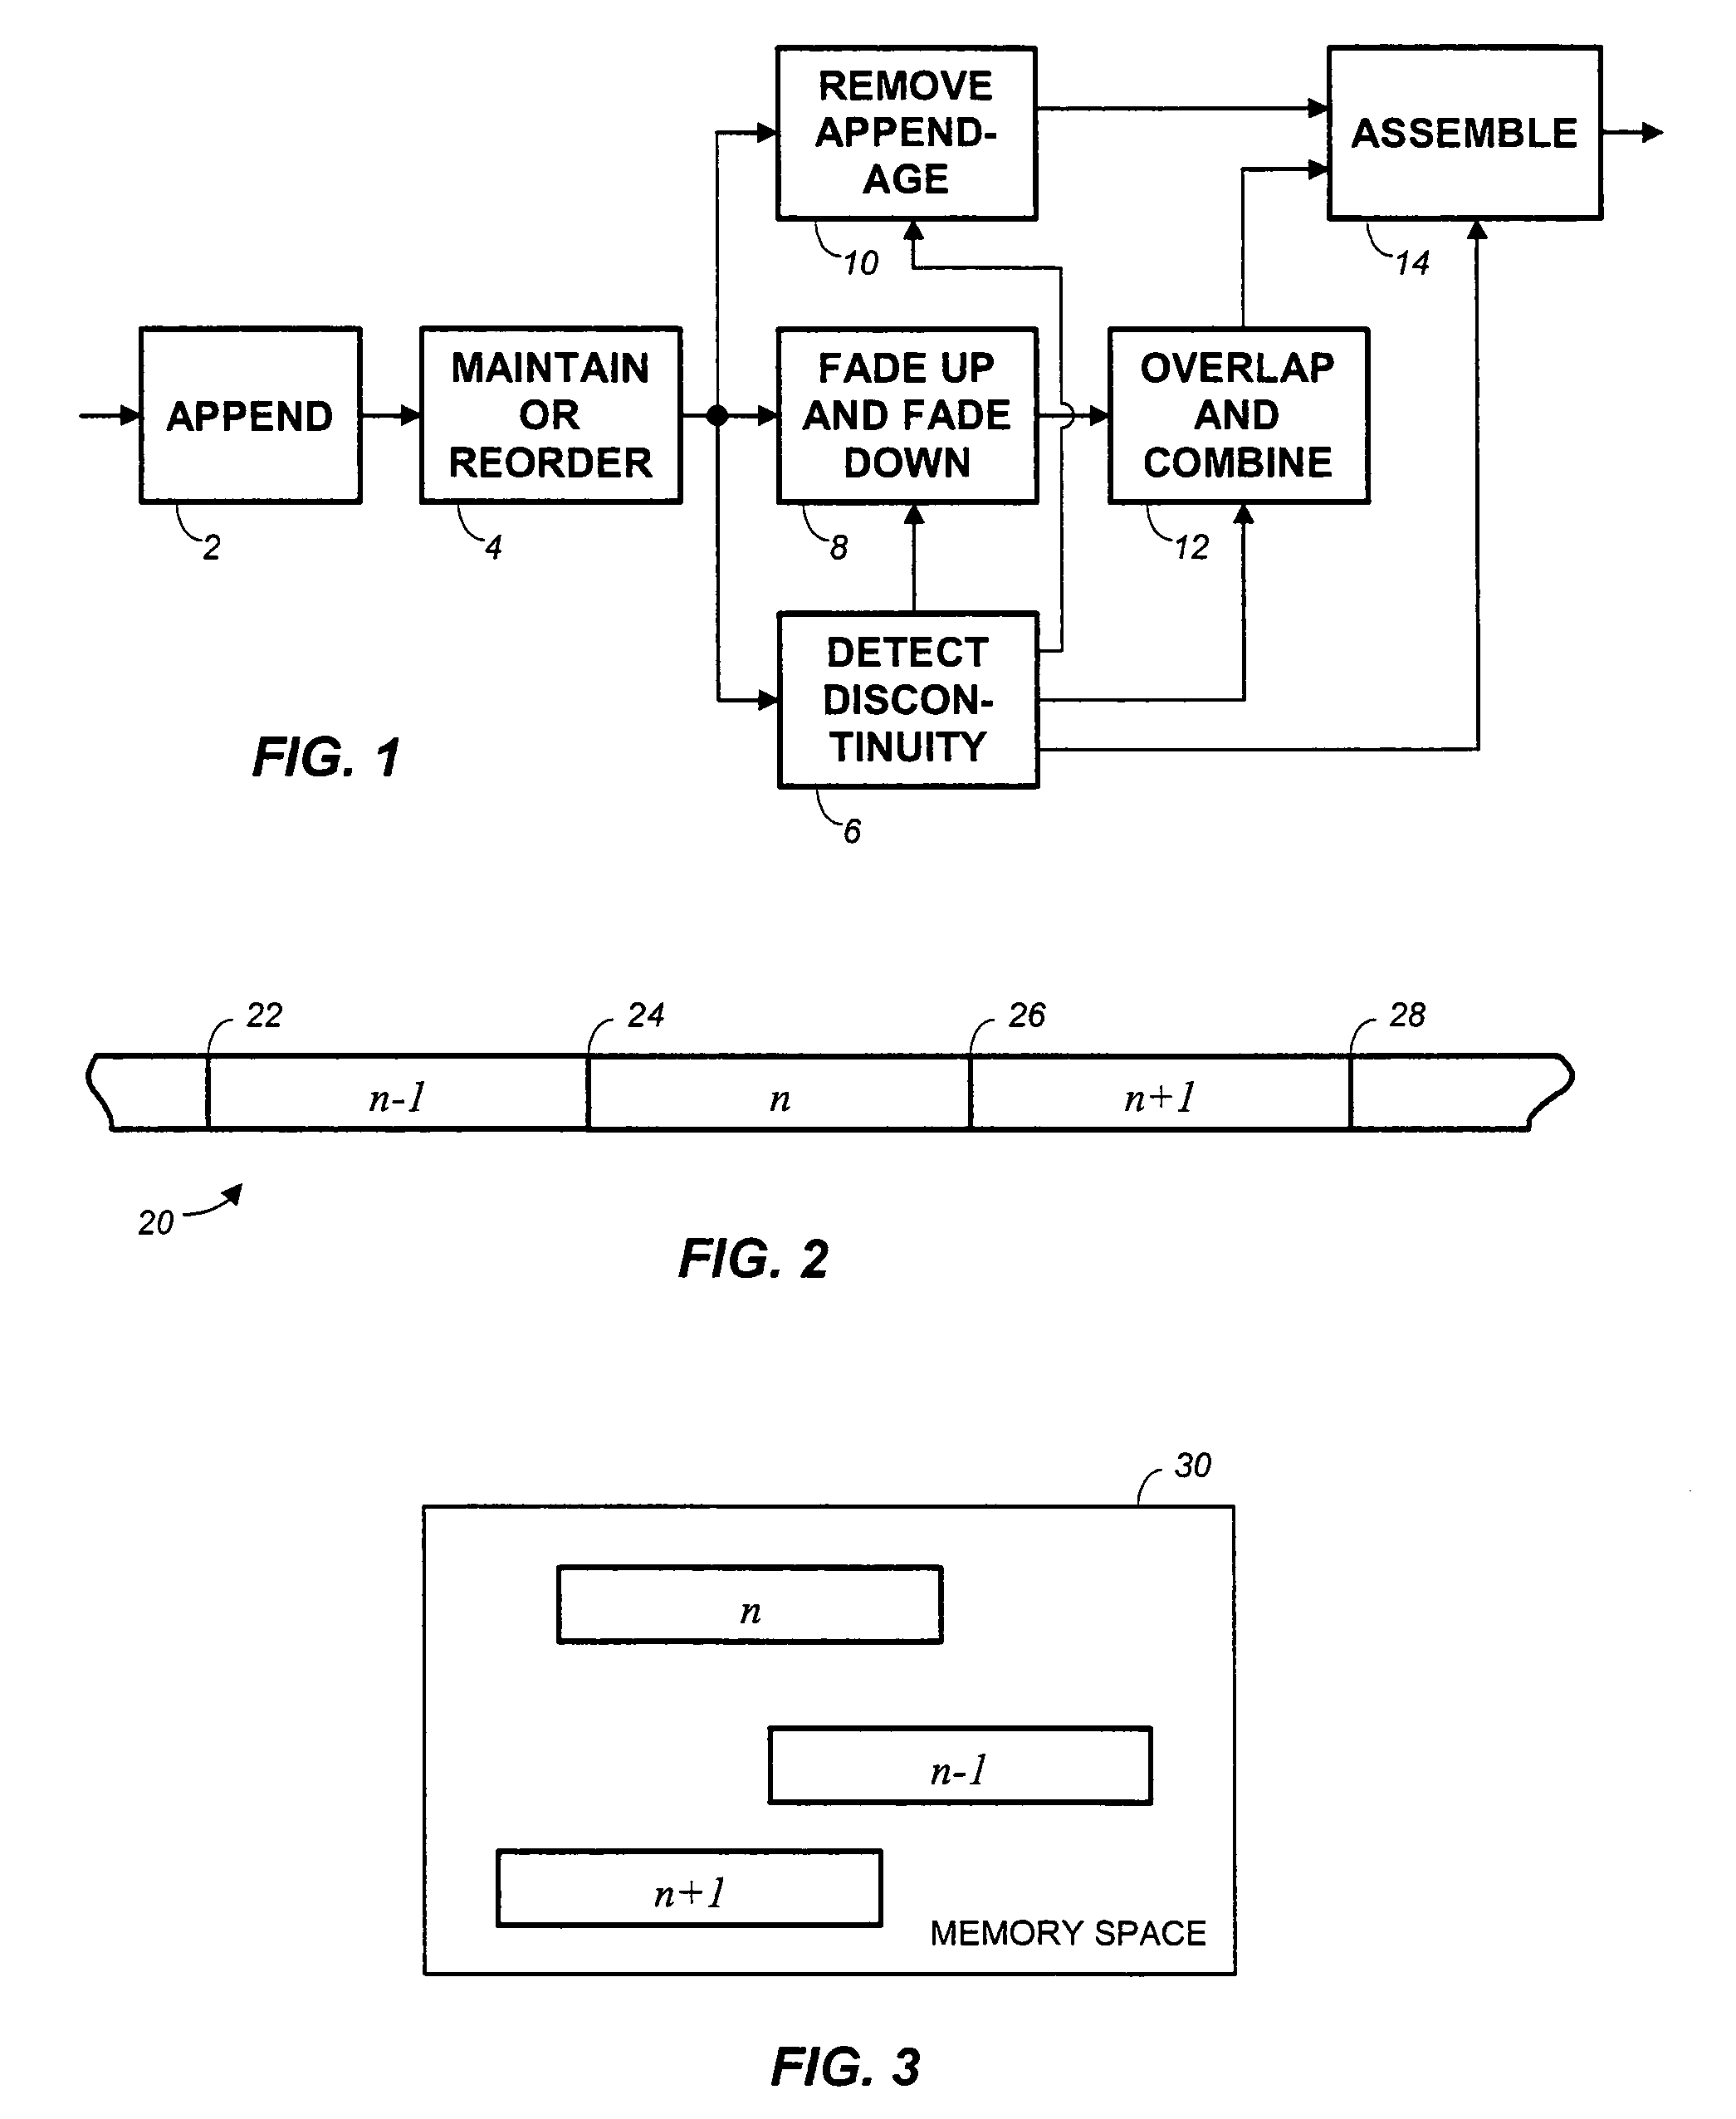 Frame-based audio transmission/storage with overlap to facilitate smooth crossfading